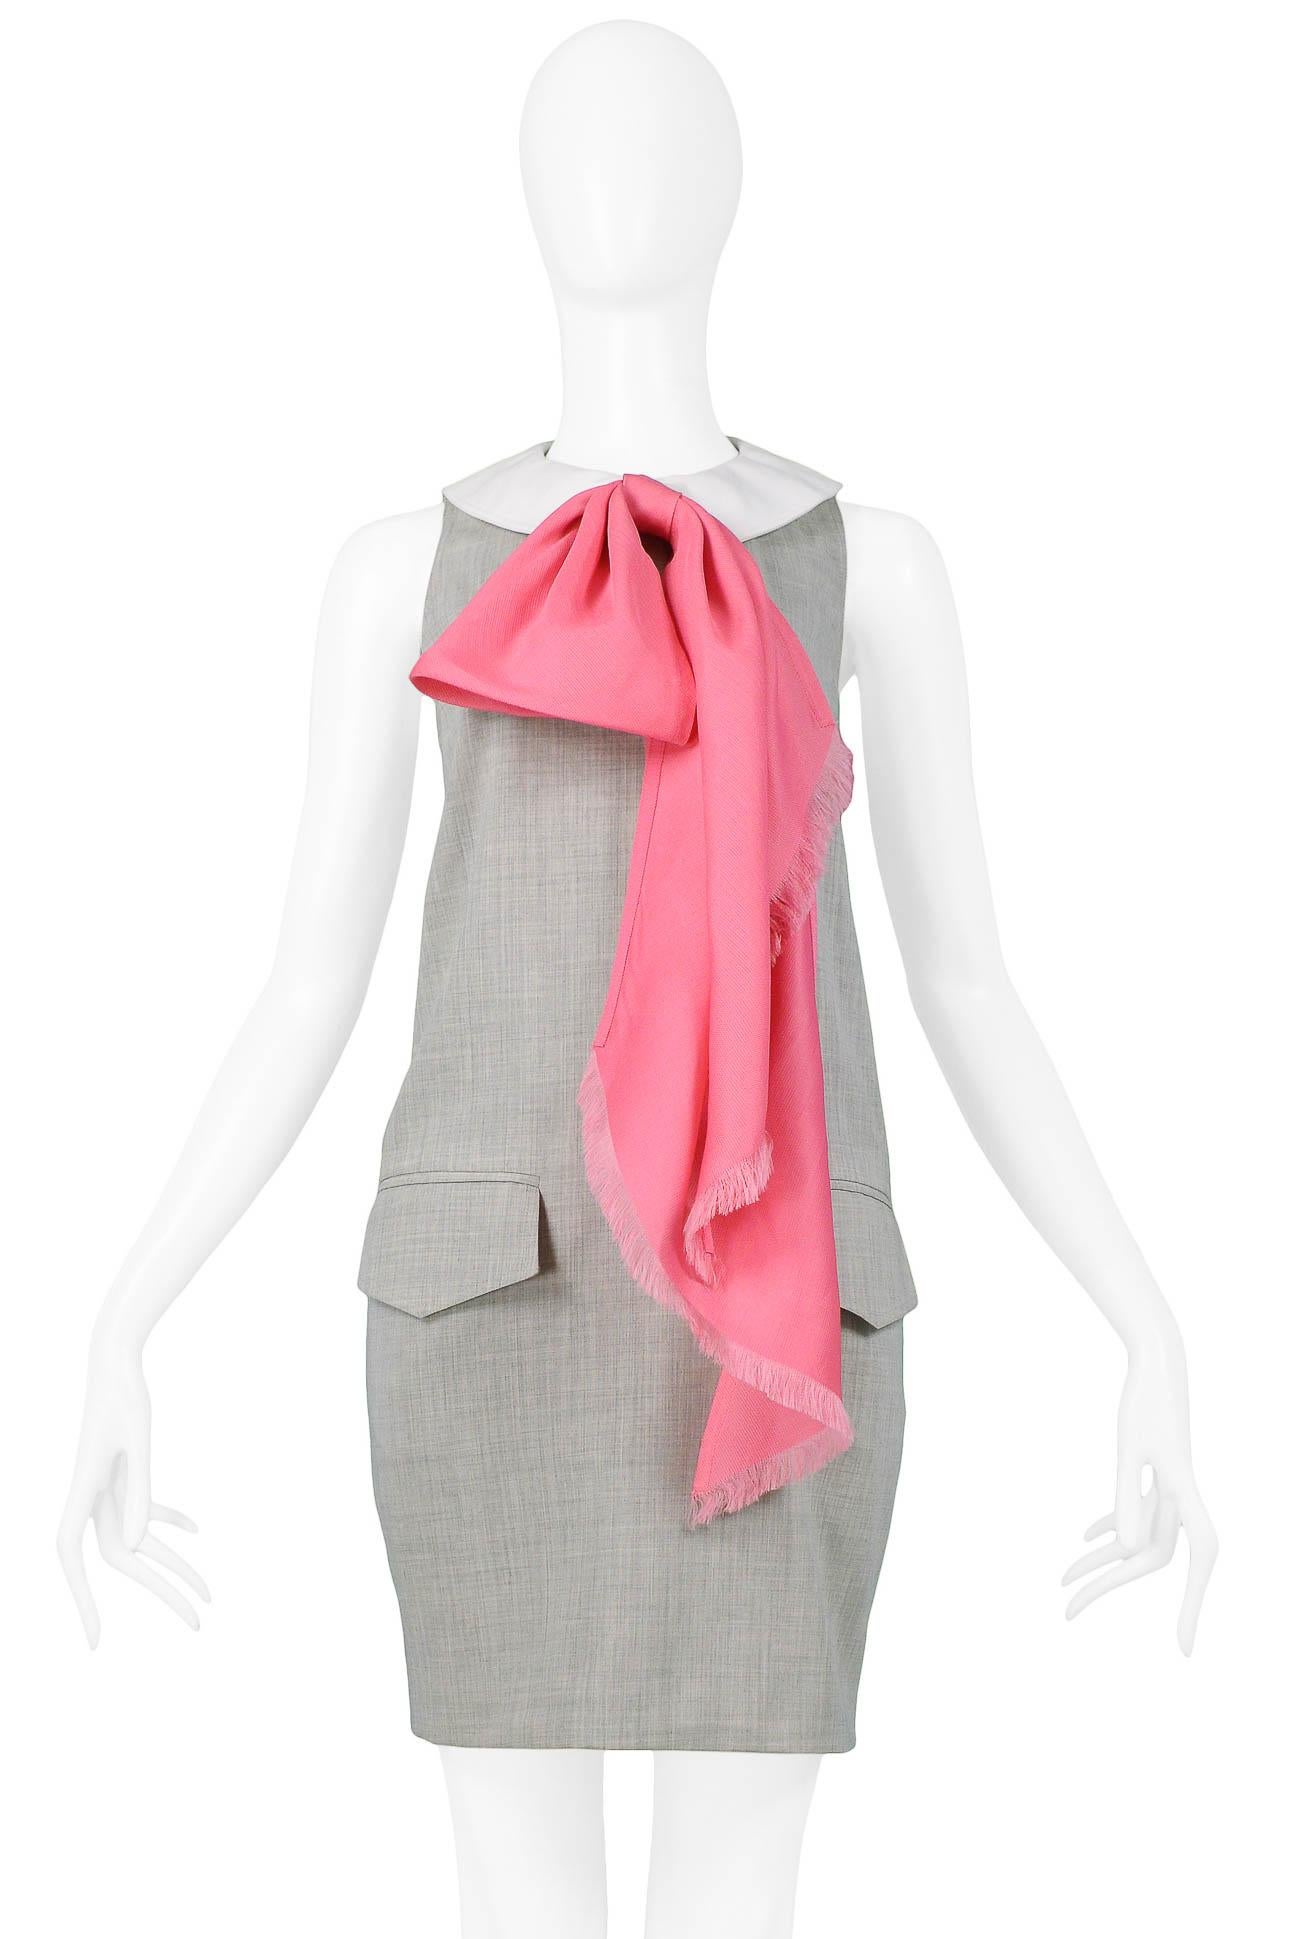 Issac Mizrahi Grey Dress With Pink Bow 1991 In Excellent Condition For Sale In Los Angeles, CA